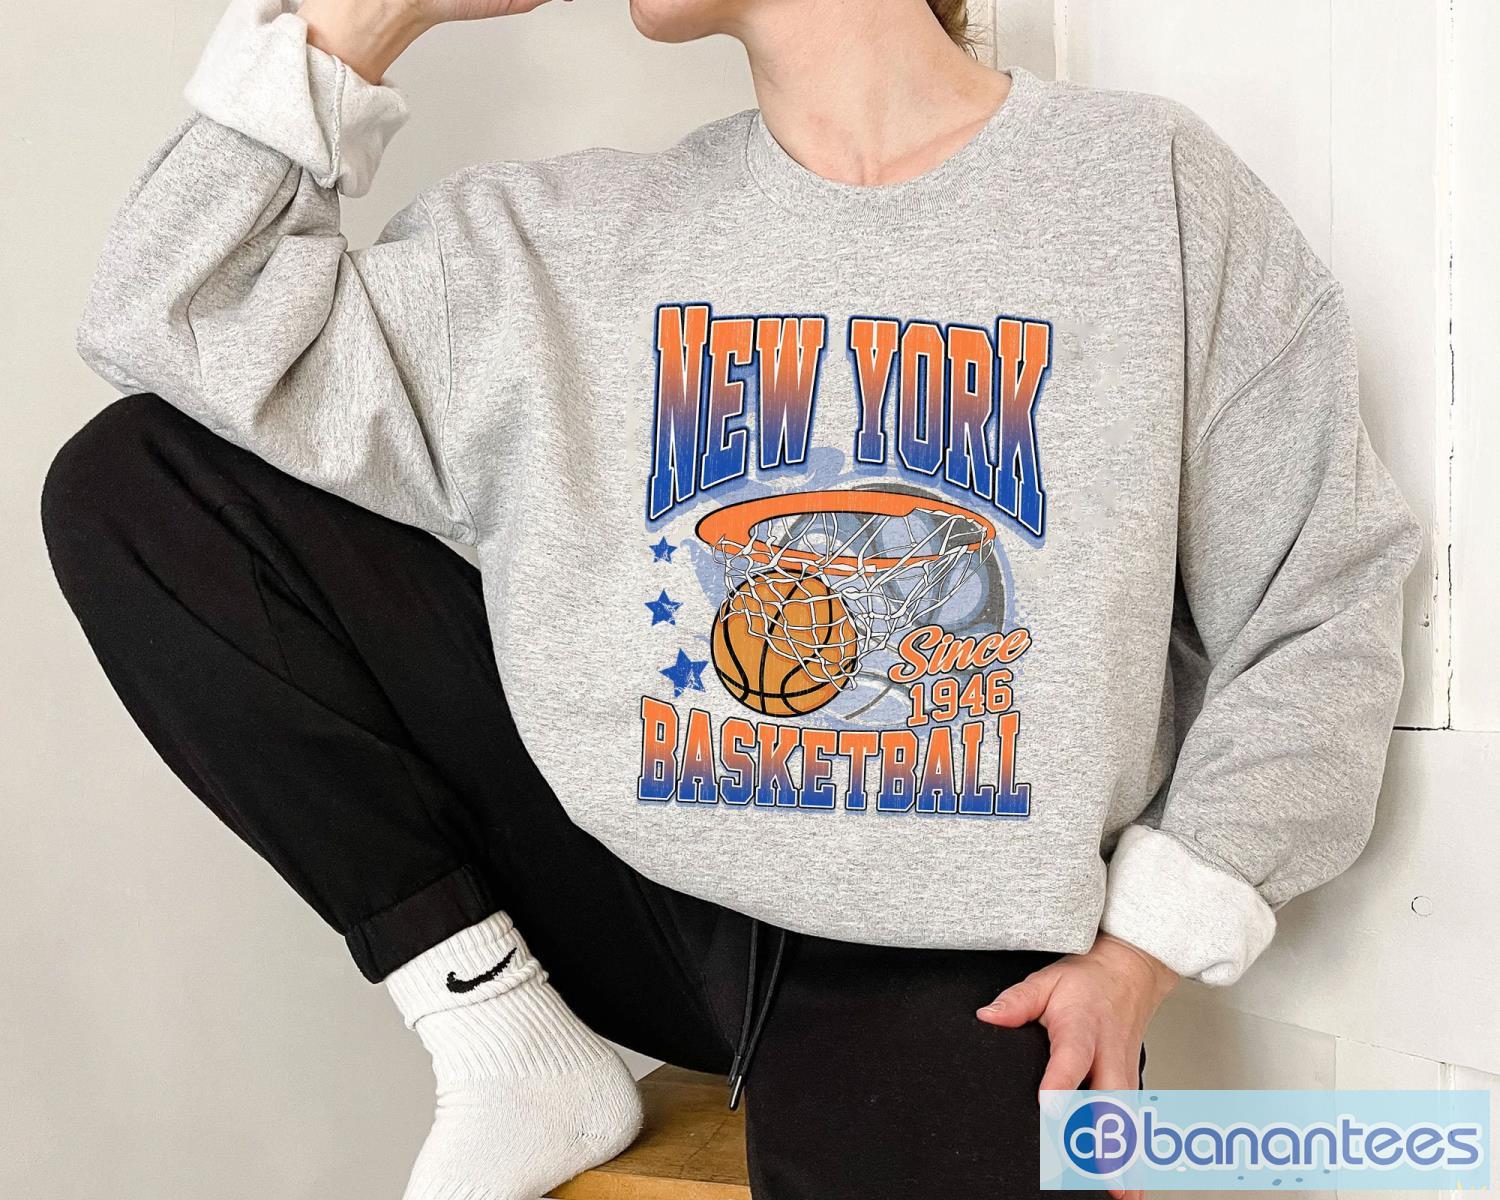 NBA New York Knicks top - Strappy tops - T-shirts - CLOTHING